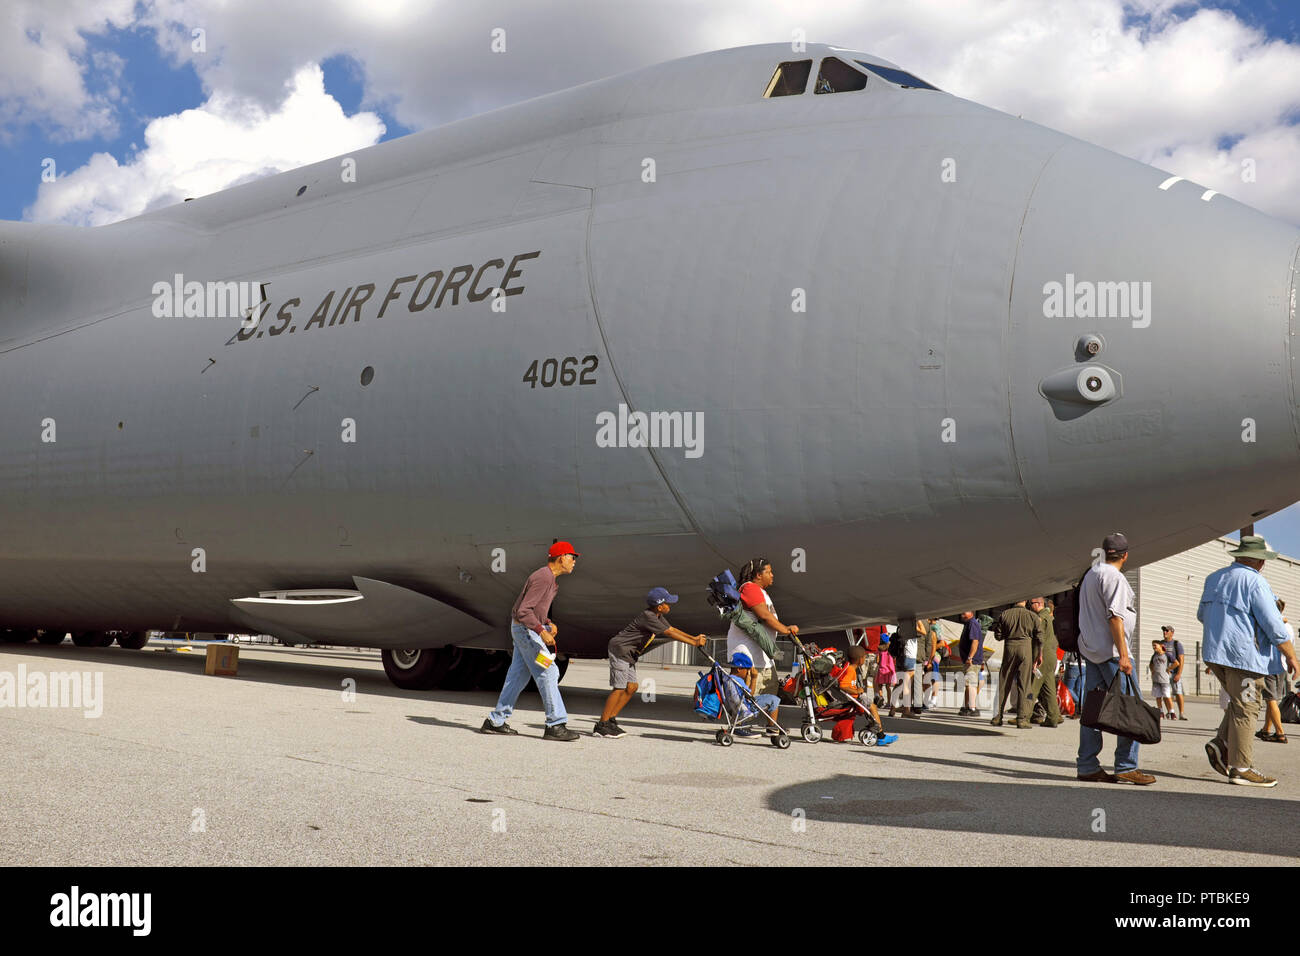 US Air Force air carrier on display at the annual Cleveland Air Show over Labor Day Weekend 2018 at Burke Lakefront Airport in Cleveland, Ohio, USA. Stock Photo